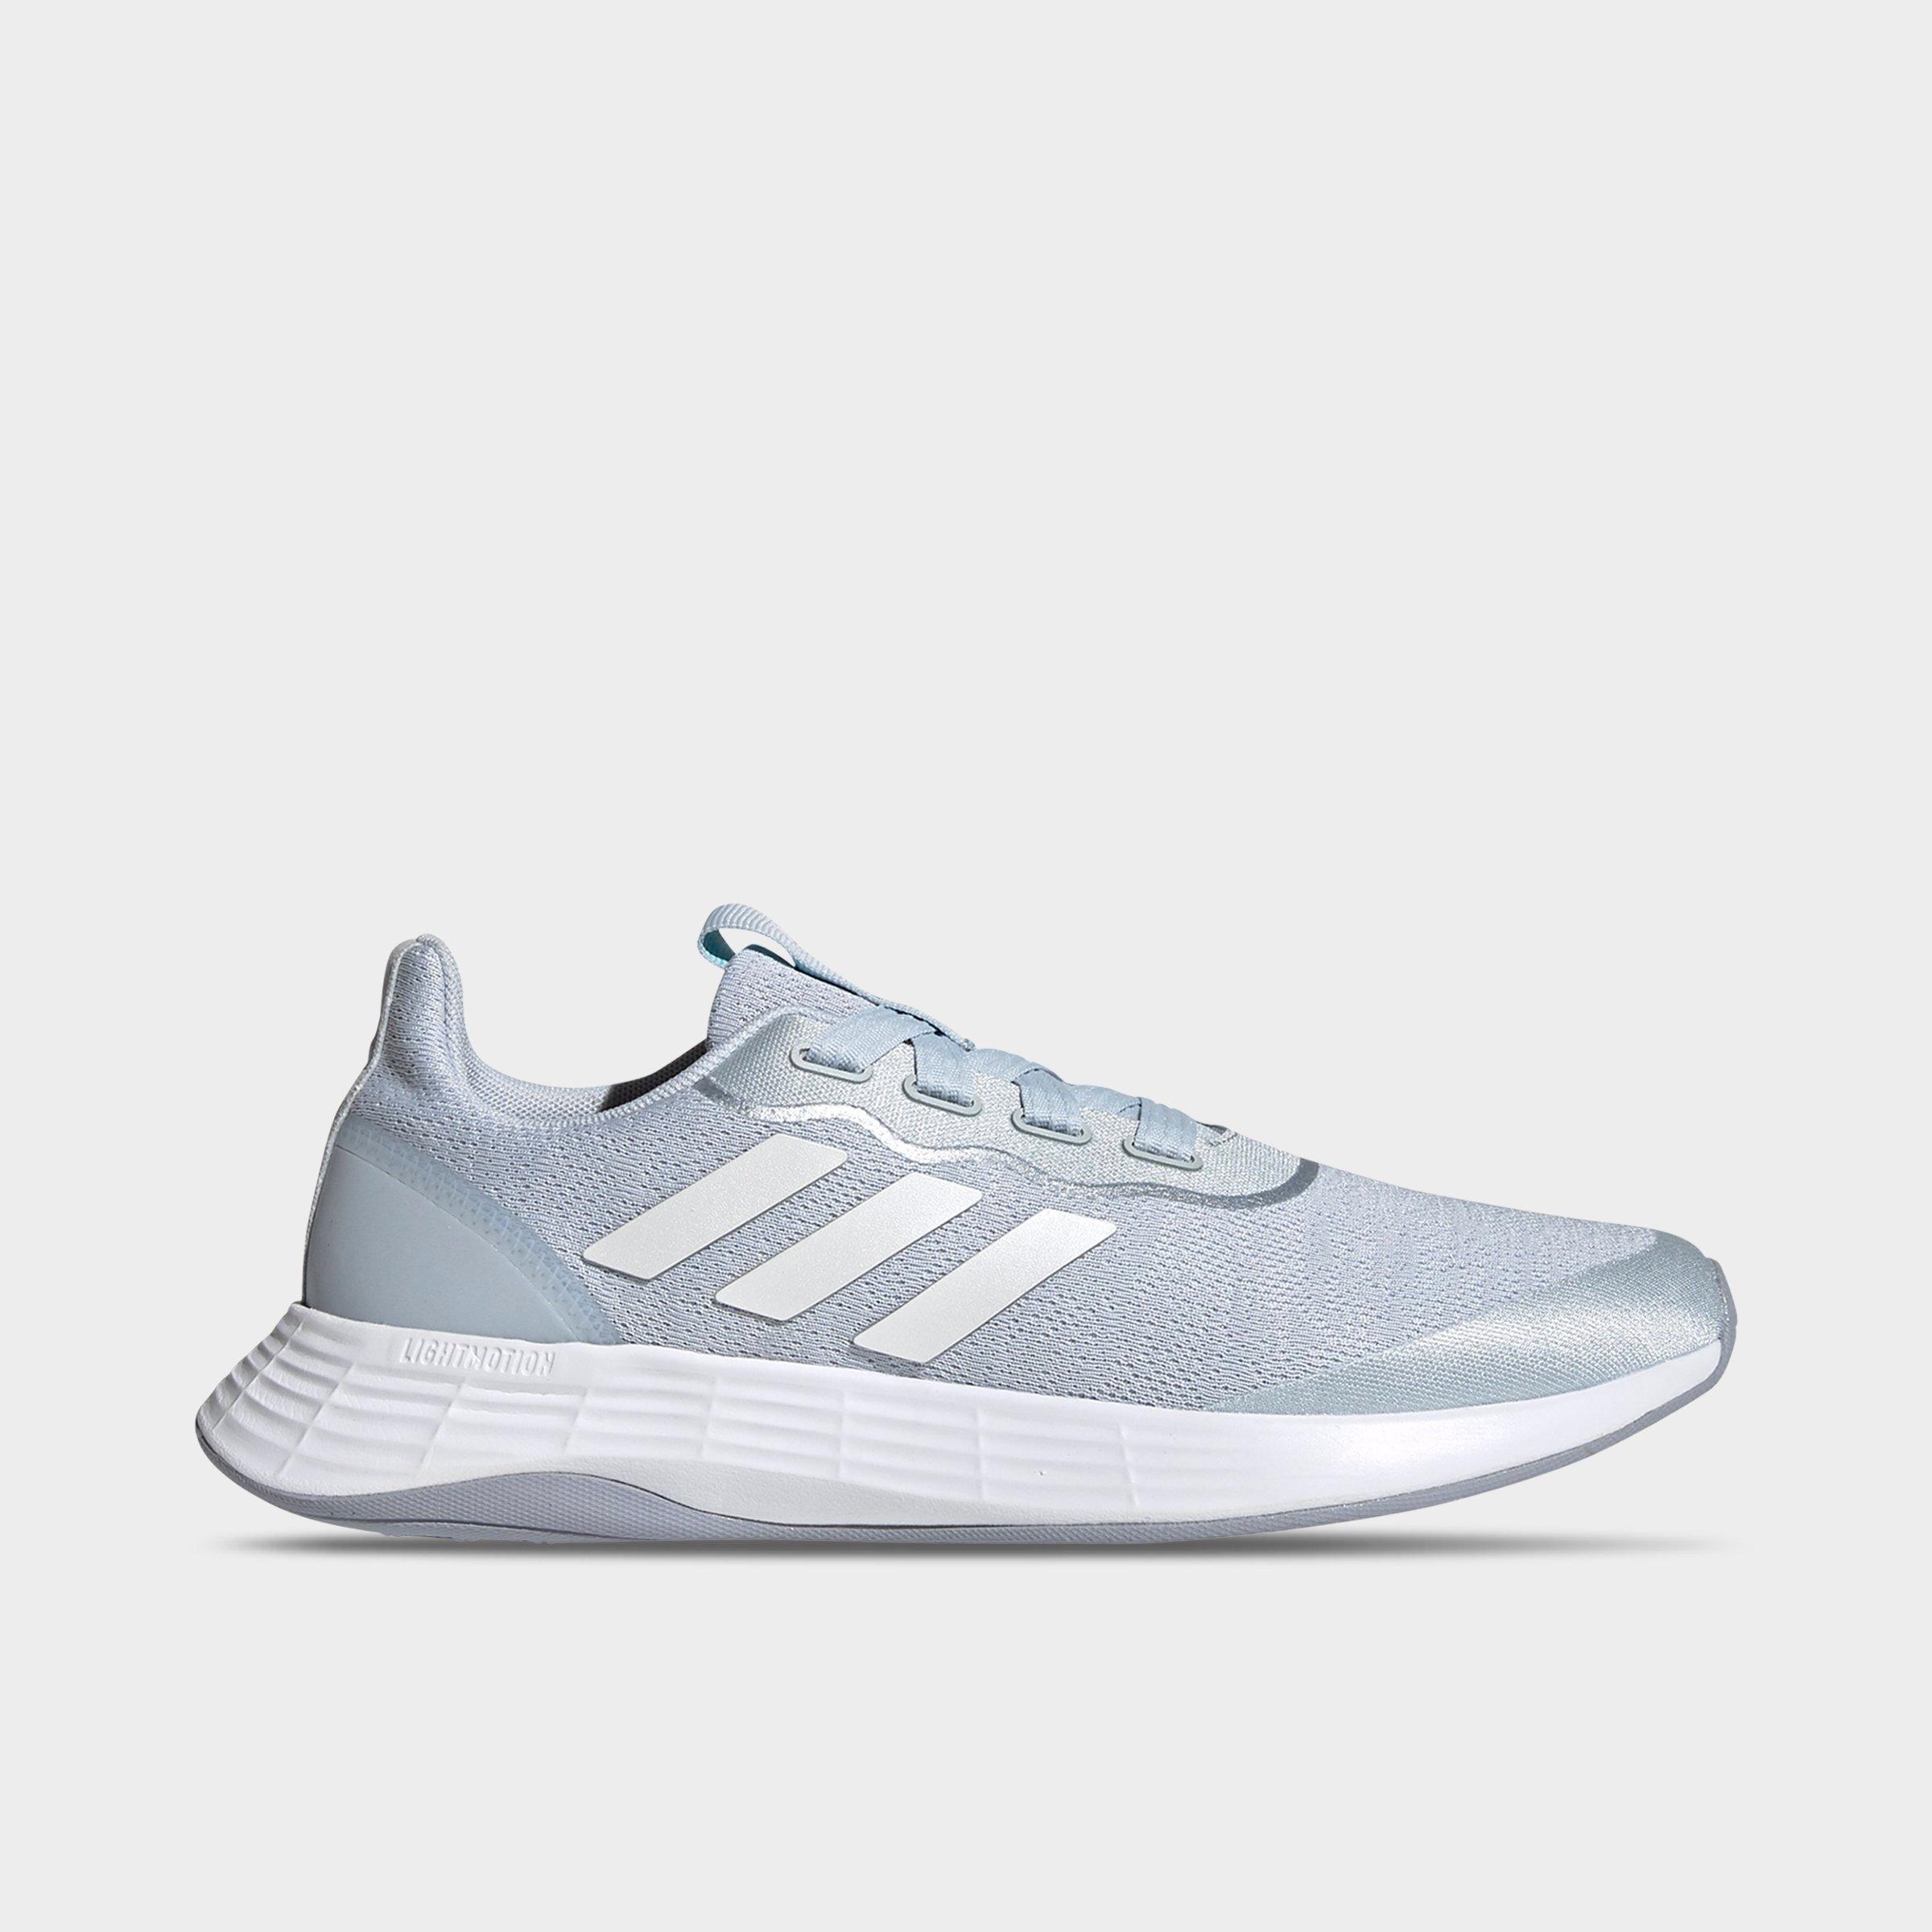 adidas racer running shoes